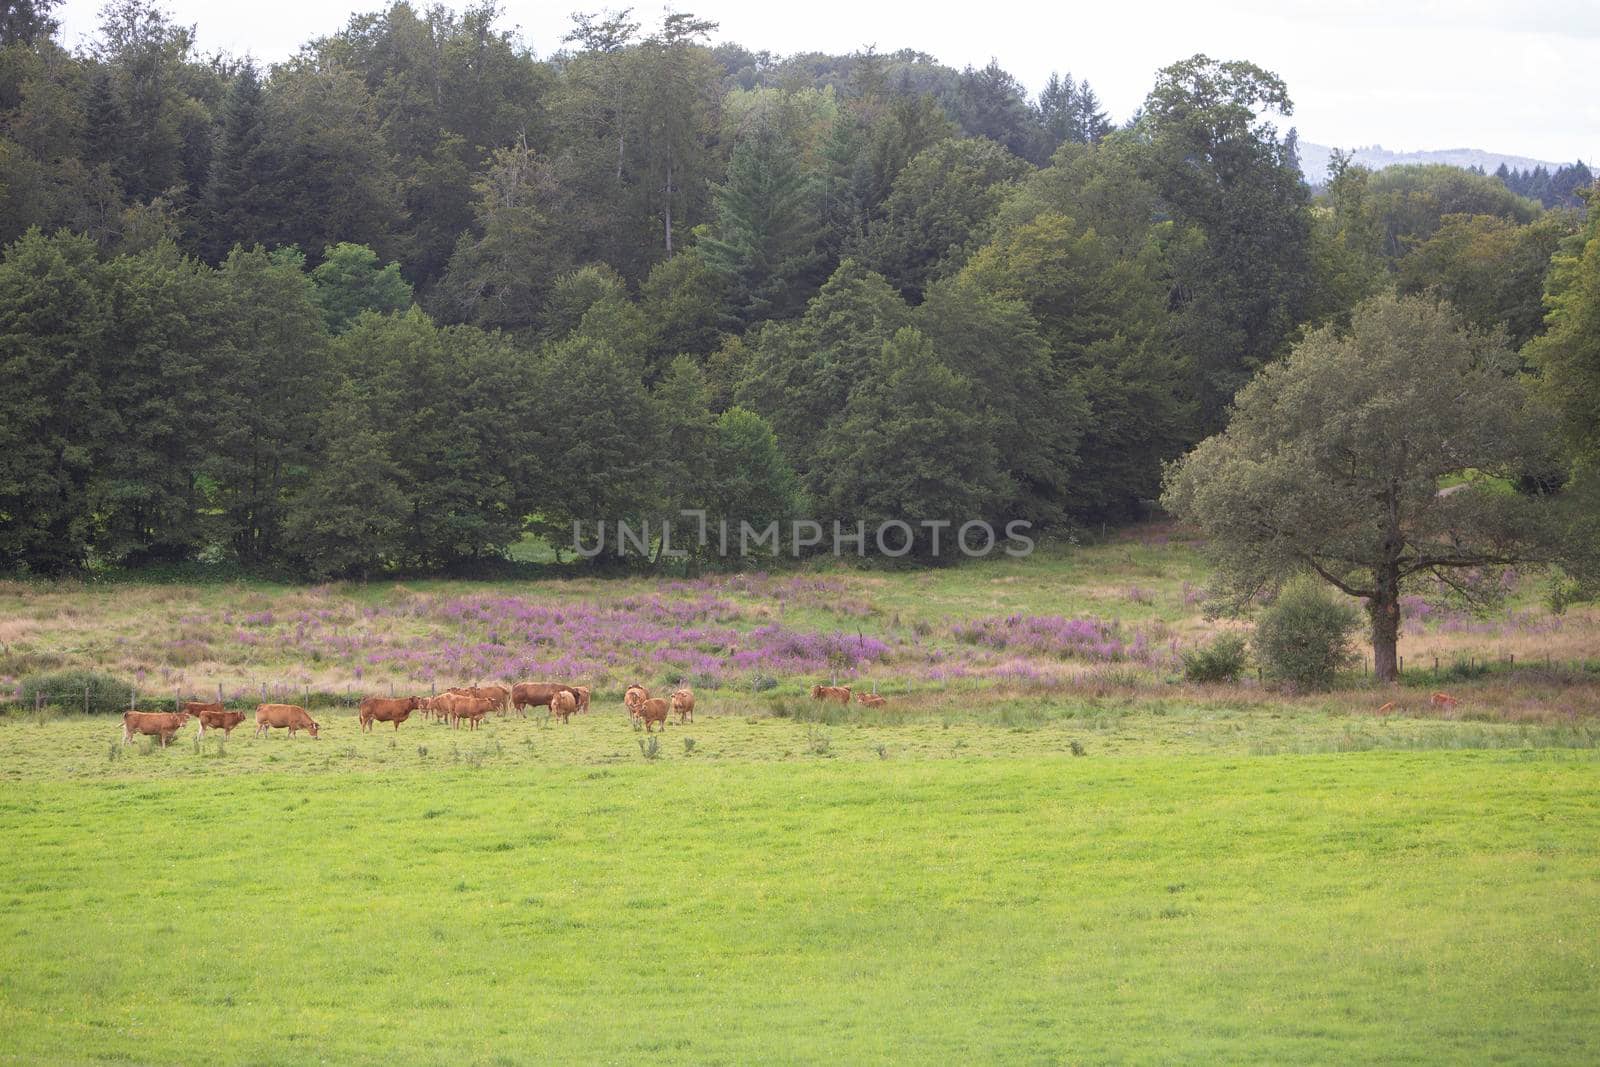 limousin cows in french green grassy meadow near heather and forest not far from limoges